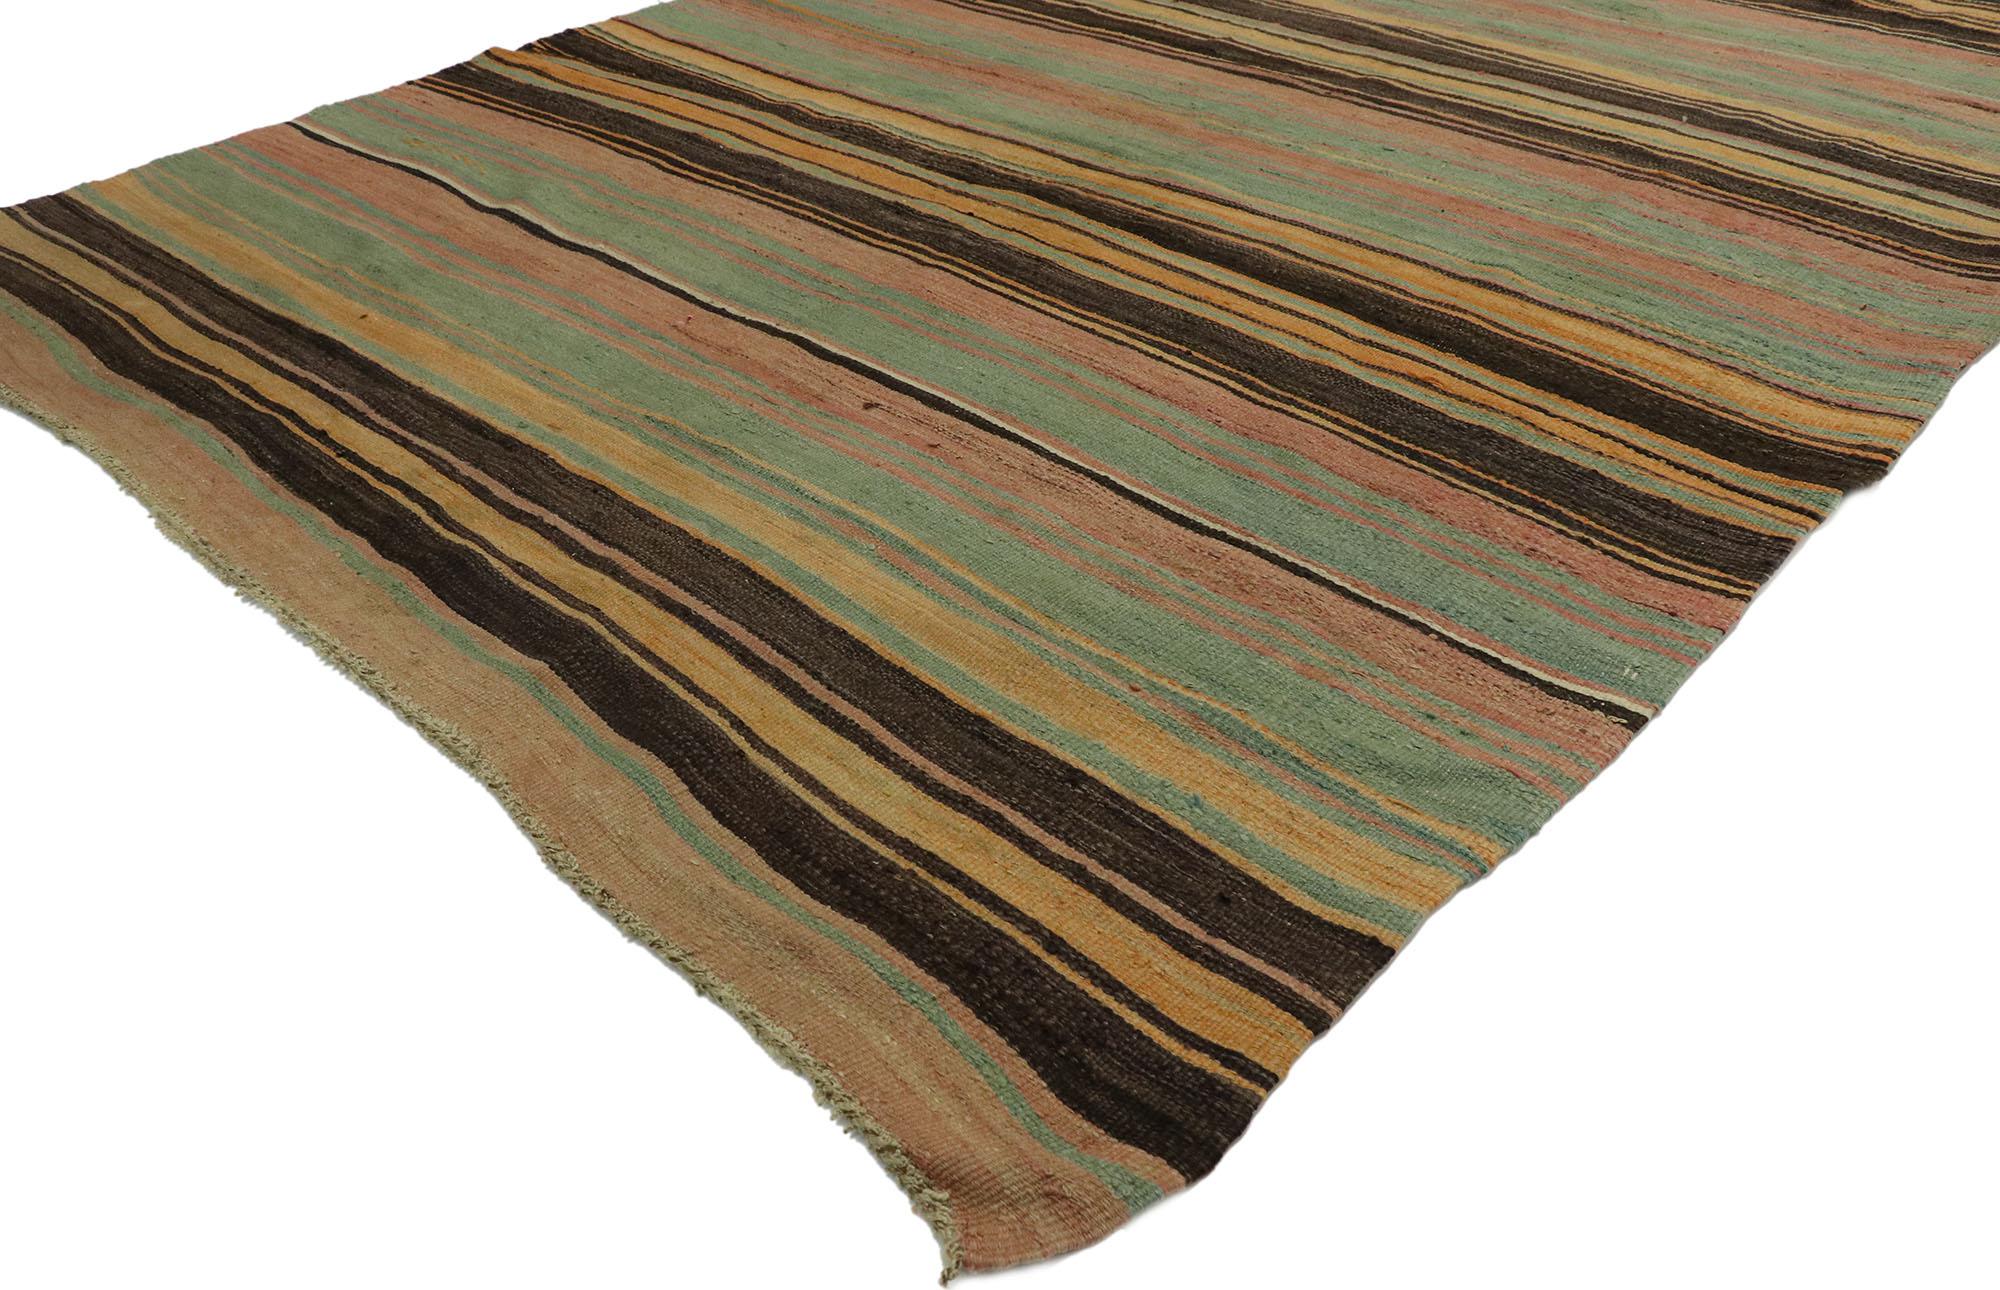 53122, vintage Turkish striped Kilim rug with modern cabin style. With its warm hues and rugged beauty, this handwoven wool striped Kilim rug manages to meld contemporary, modern, and Traditional Design elements. The flat-weave Kilim rug features a